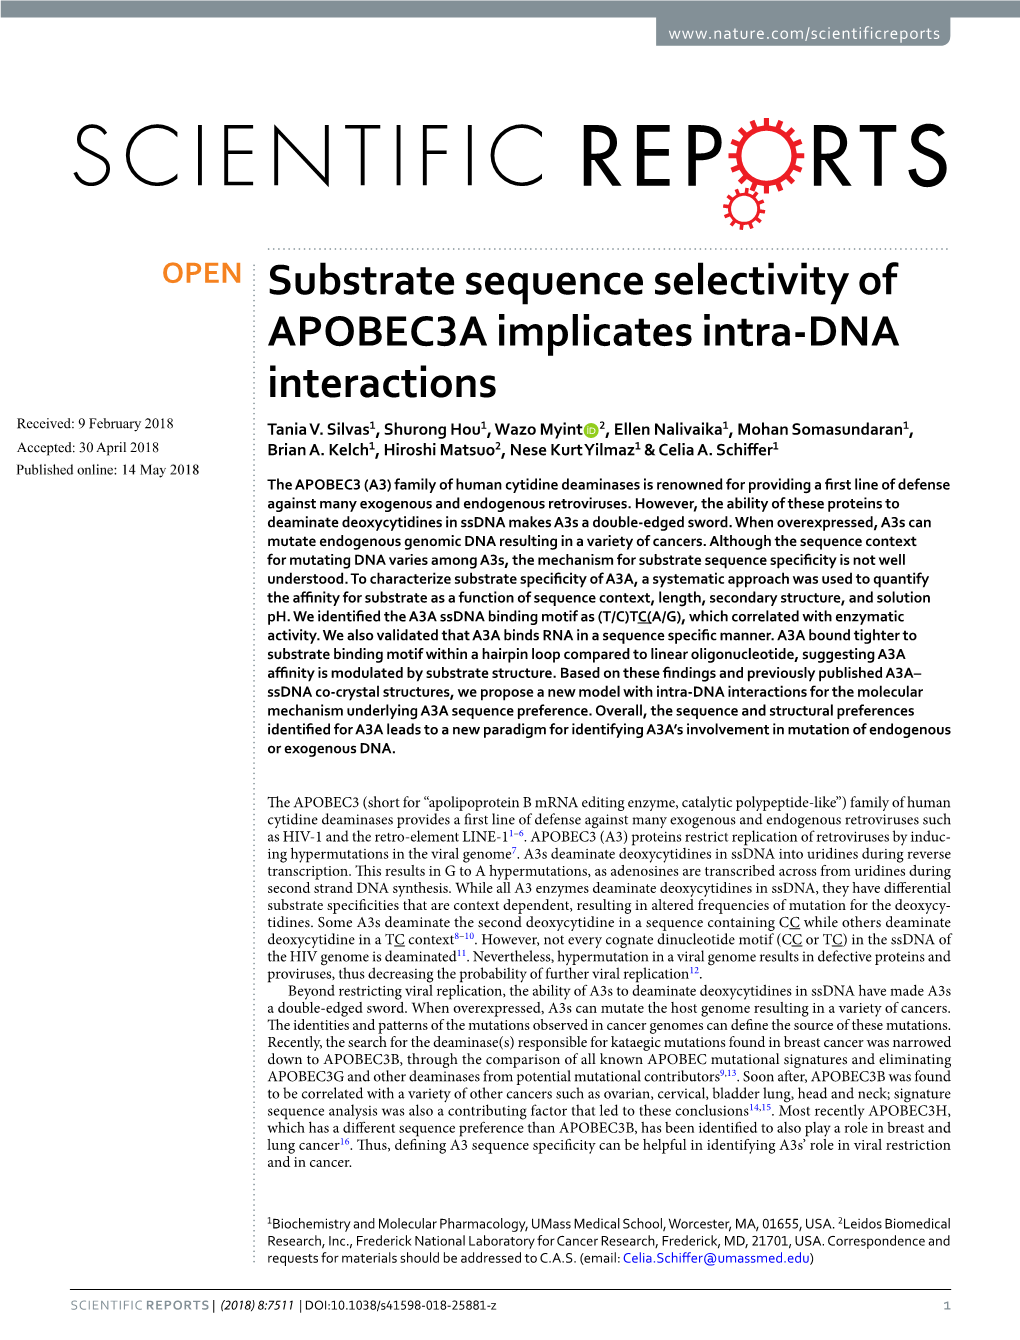 Substrate Sequence Selectivity of APOBEC3A Implicates Intra-DNA Interactions Received: 9 February 2018 Tania V